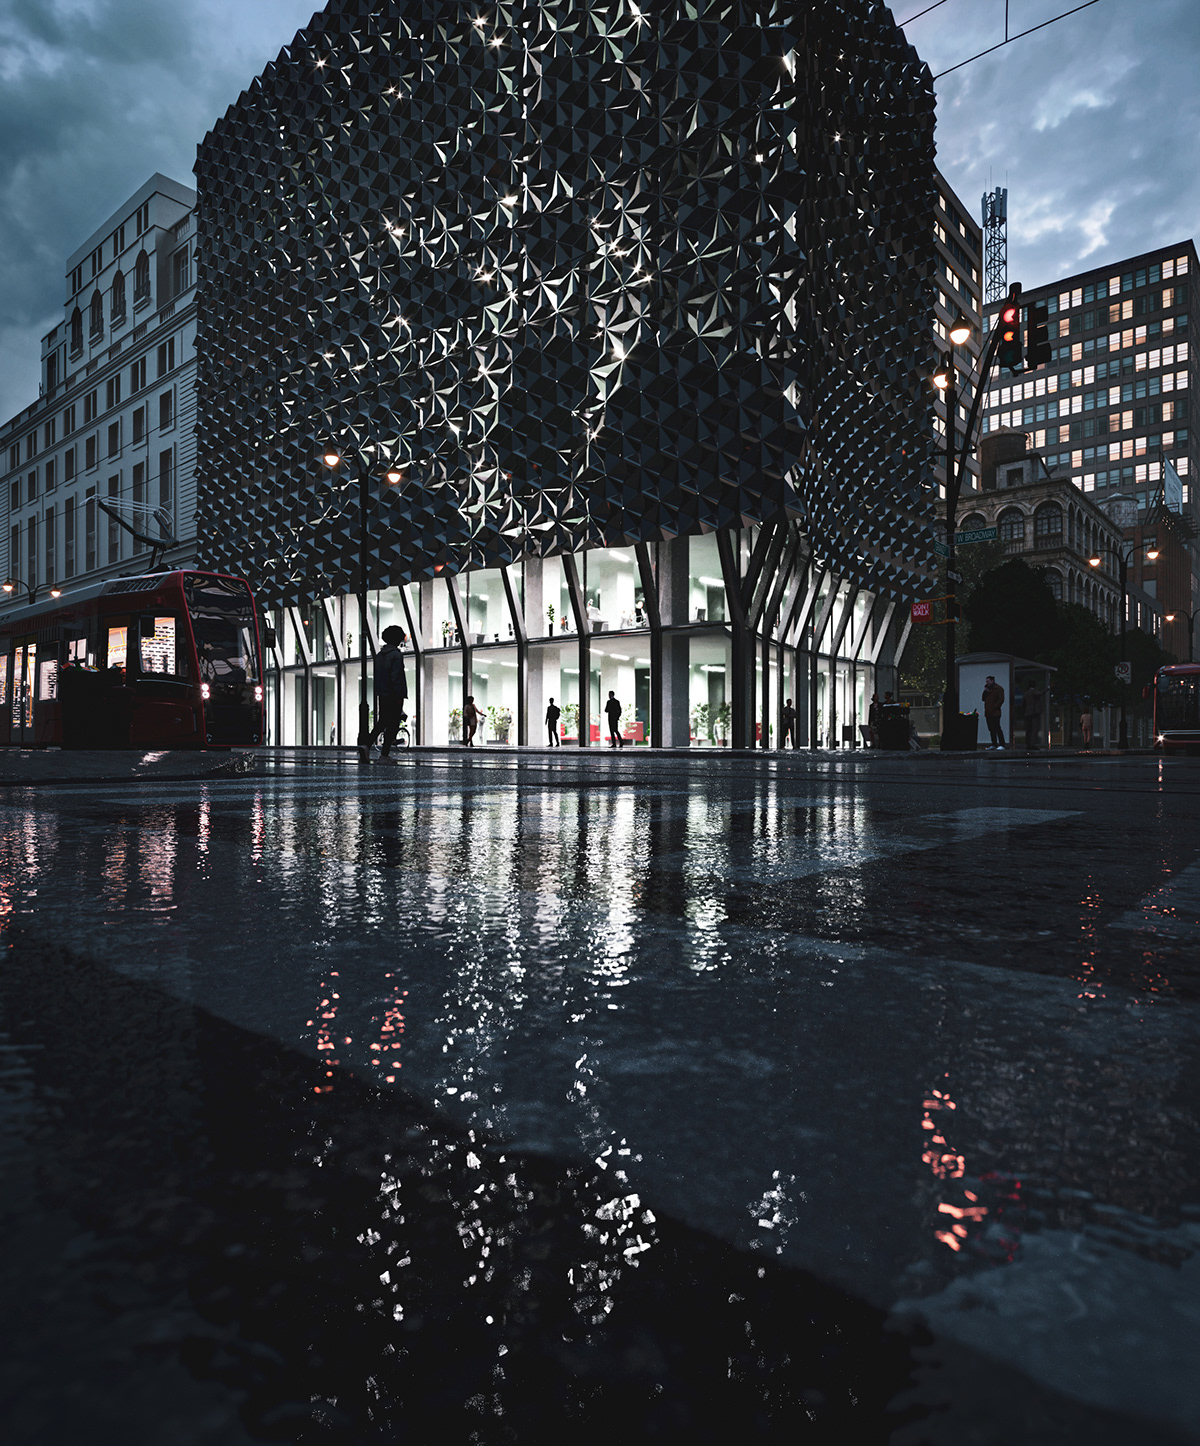 cg art cityscapes lightroom 3DS Max Design architecture visualization archviz 3d modeling and rendering rainy day